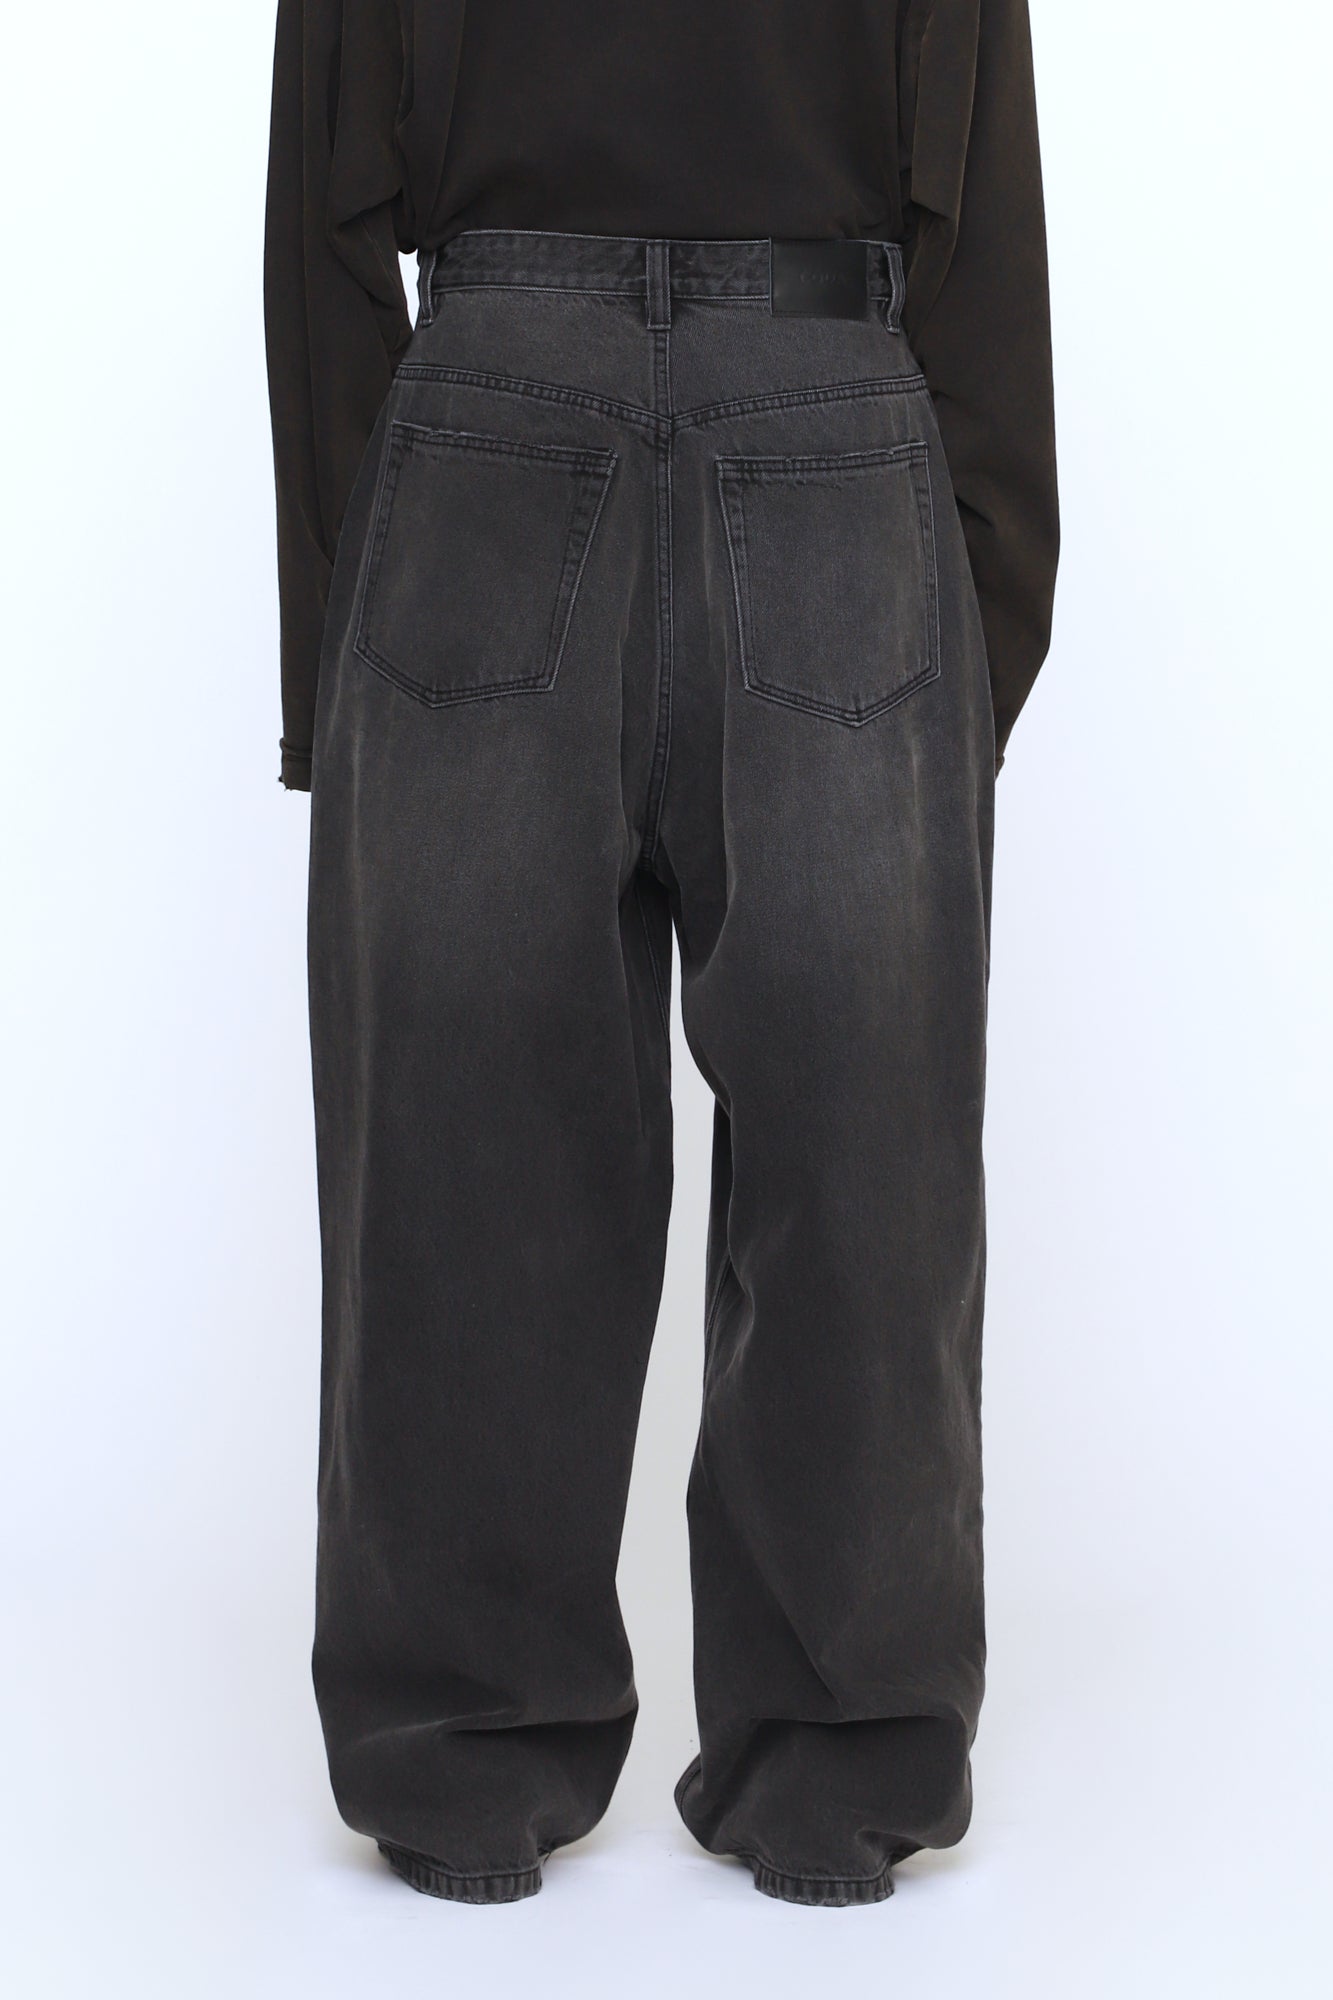 BLACK WASHED DISTRESSED EXTENDED CUT LUFT JEANS